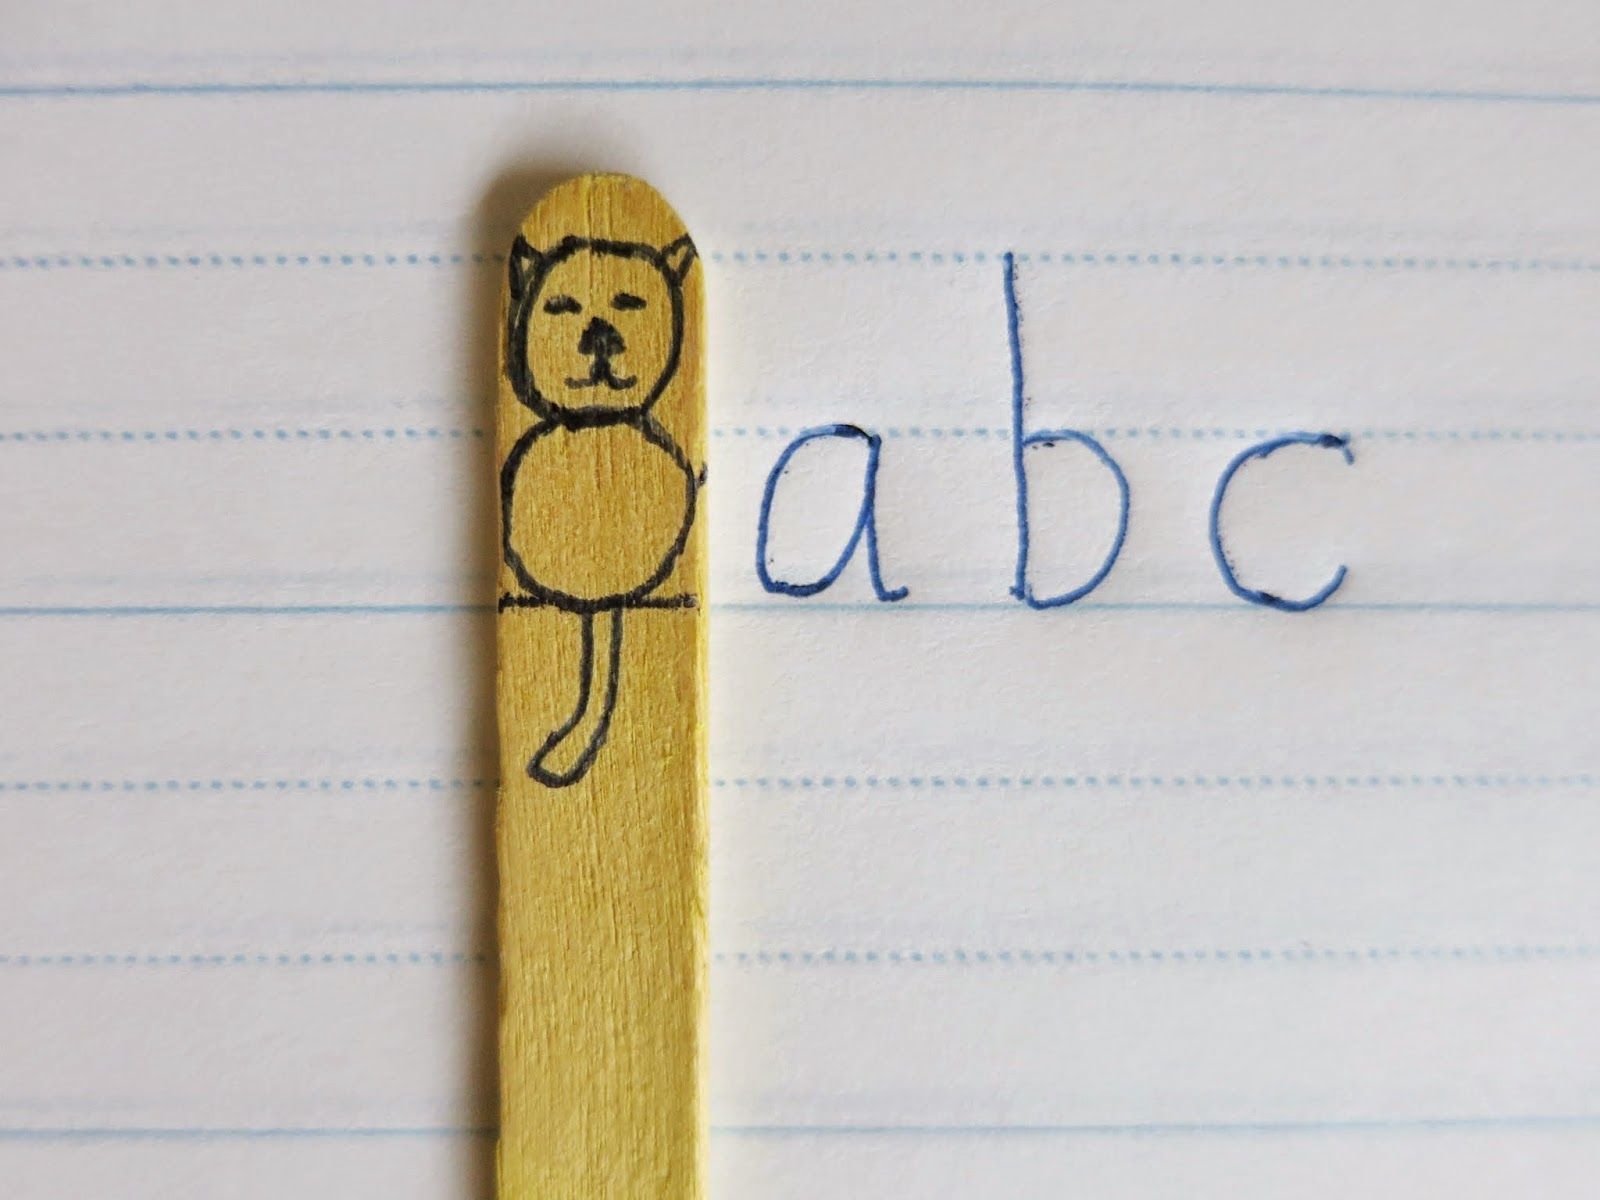 Cute classroom trick for kids learning to write in the lines. “Clever Cat” helps as a visual aid to assist